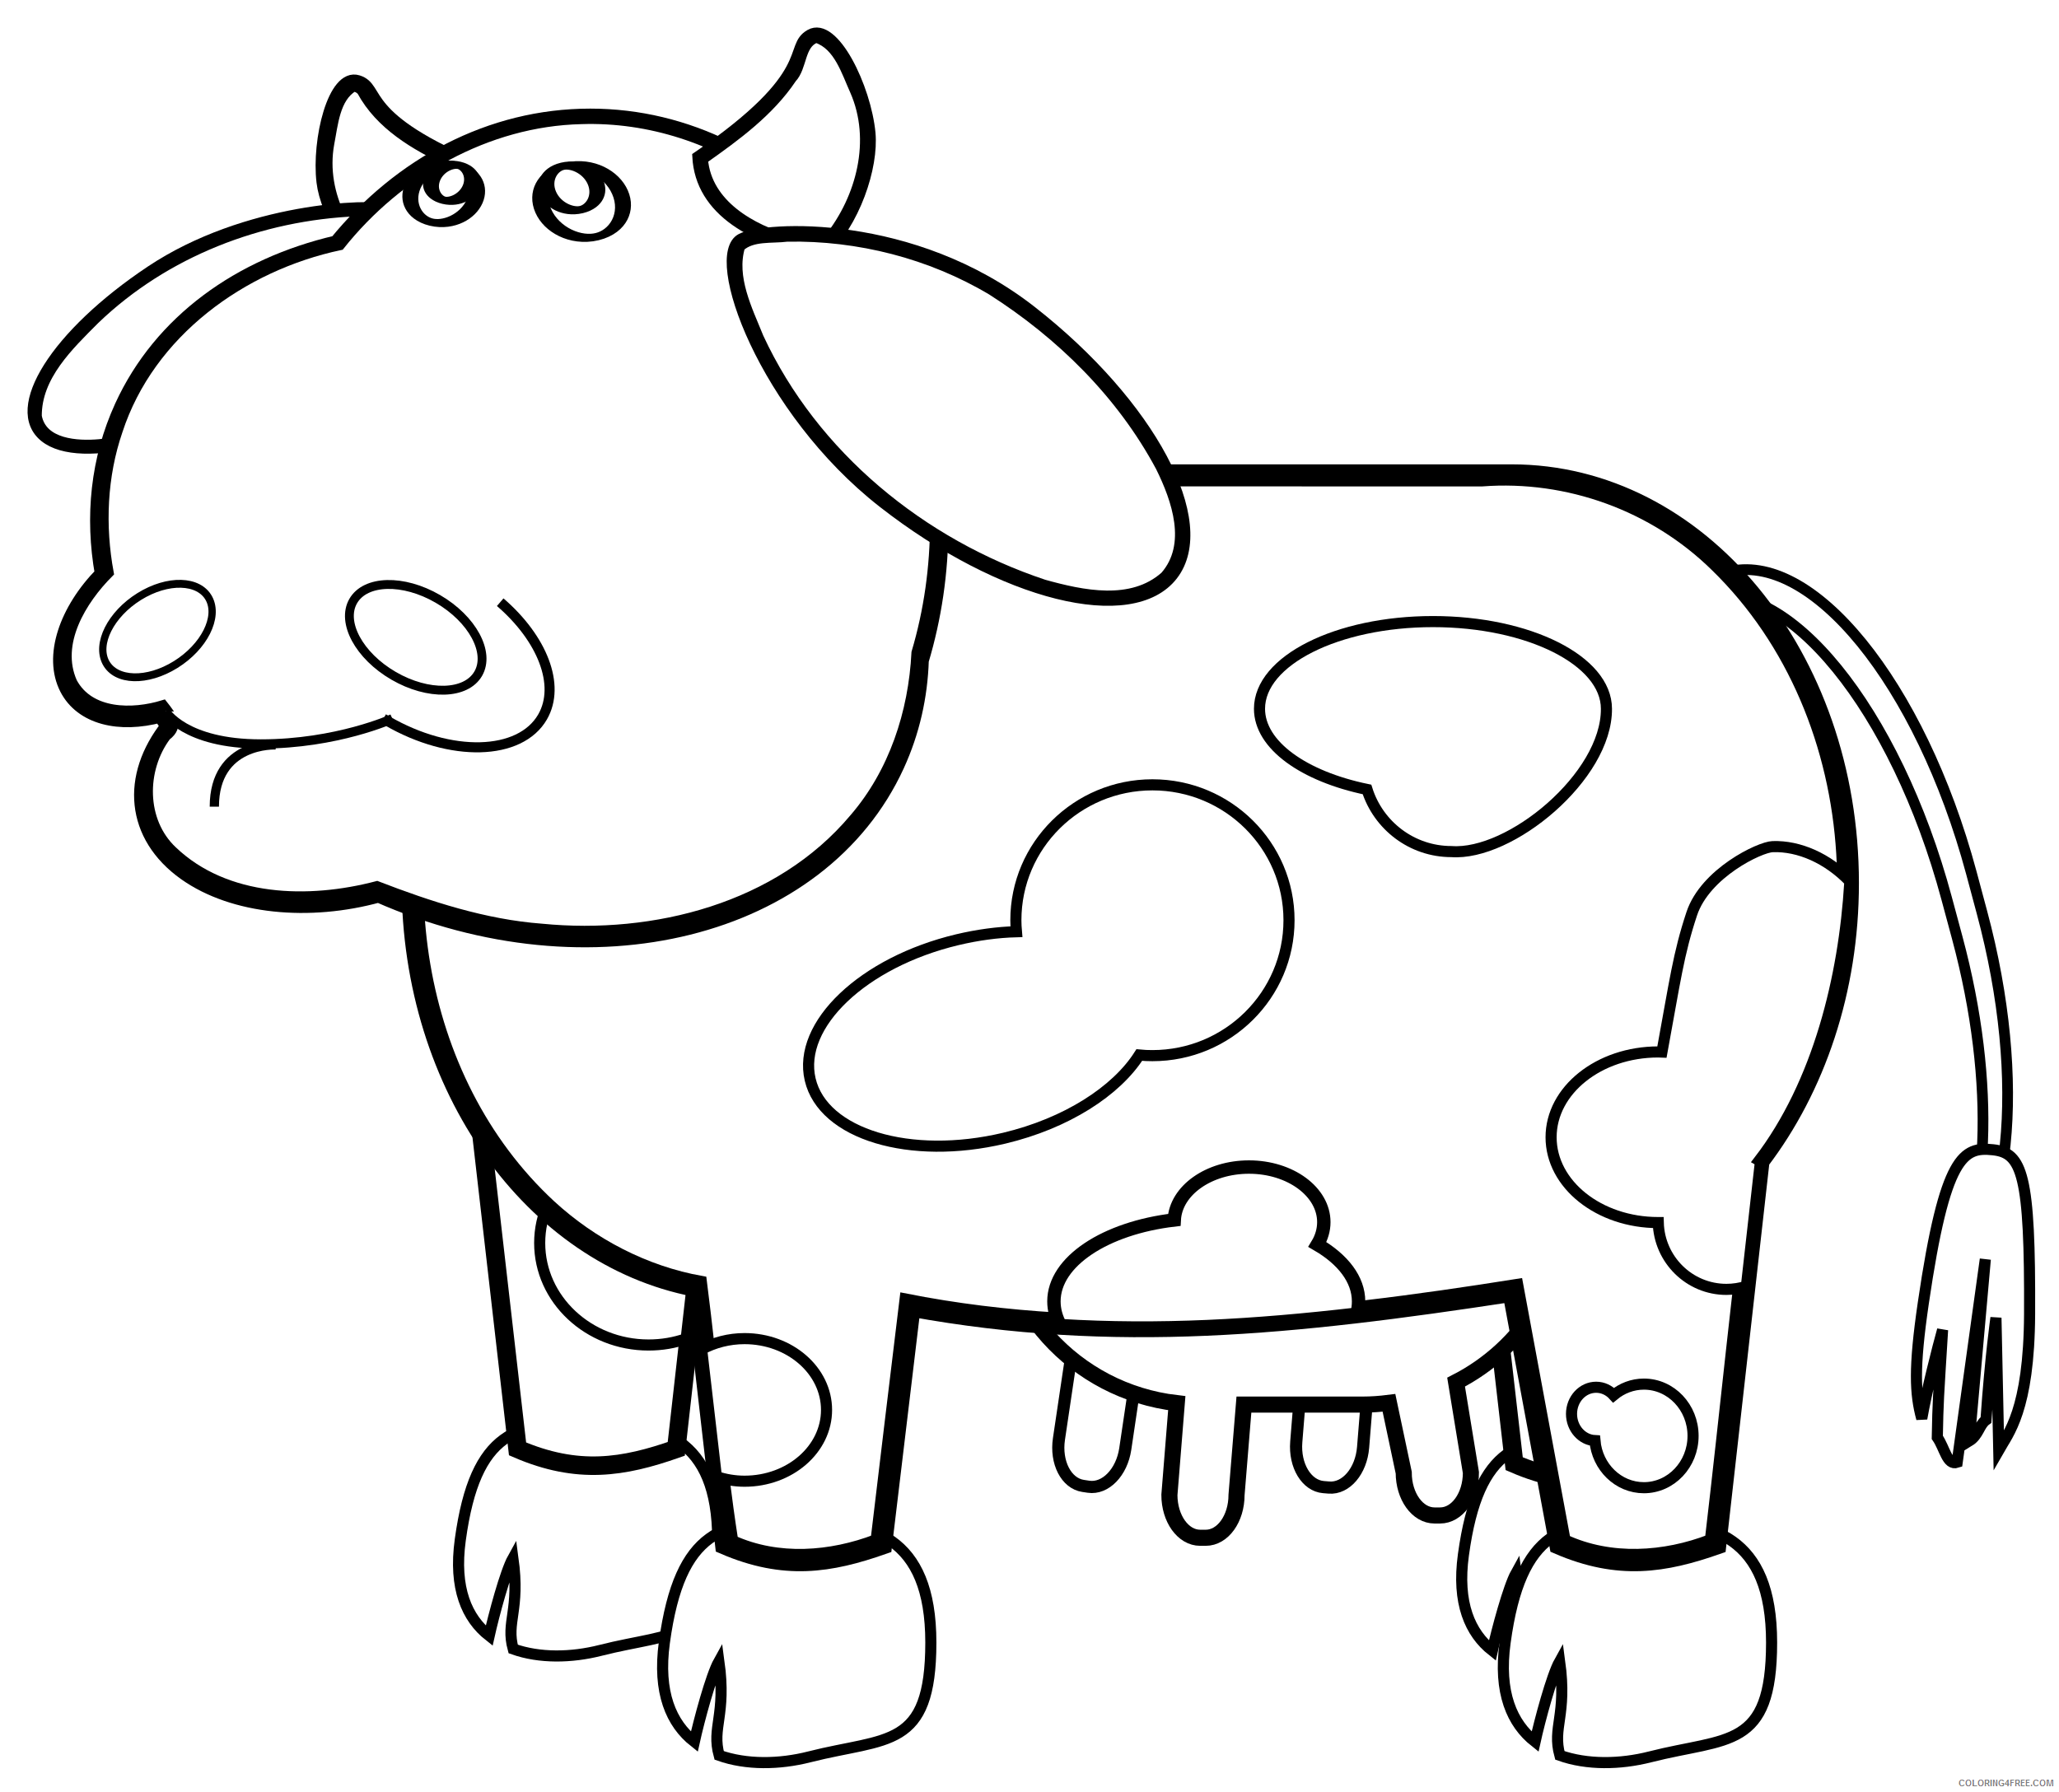 Cow Outline Coloring Pages rygle cow outline bpng Printable Coloring4free